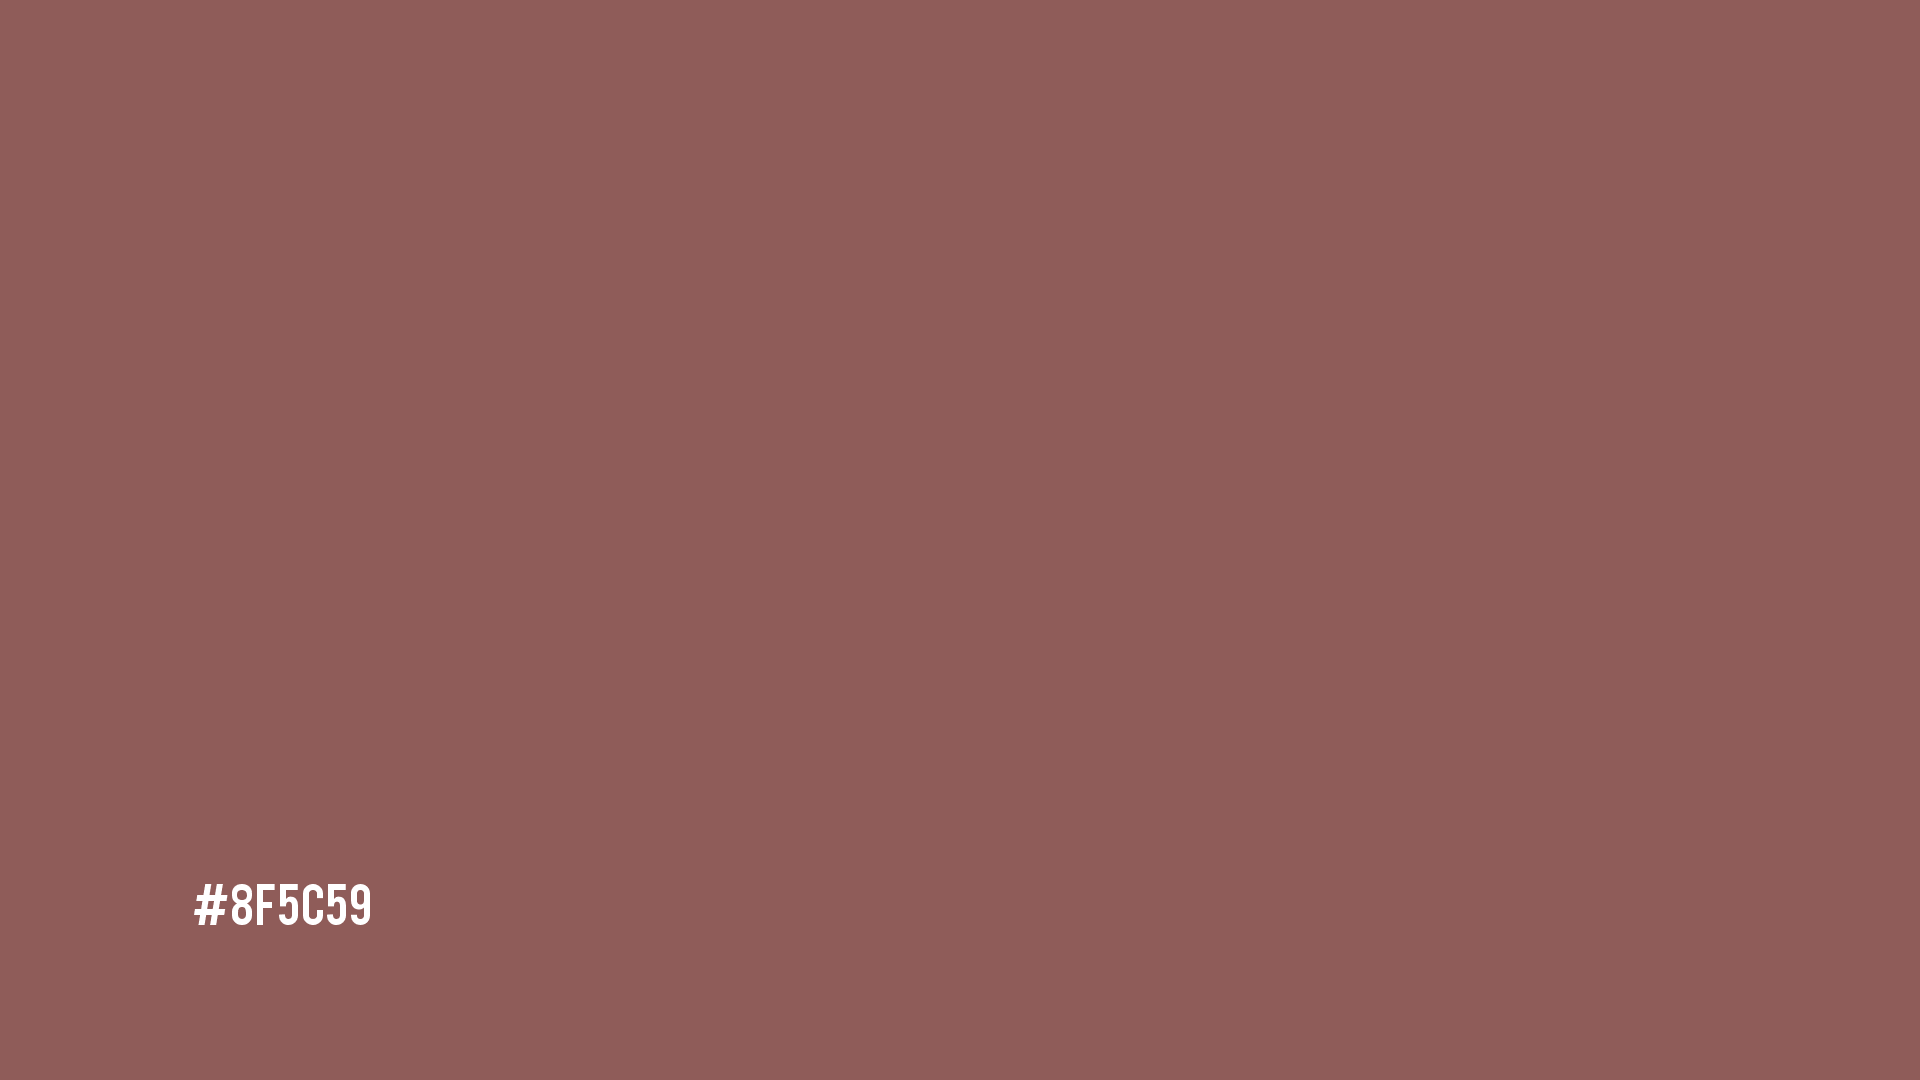 8f5c59 (dark red) info, conversion, color schemes and complementary